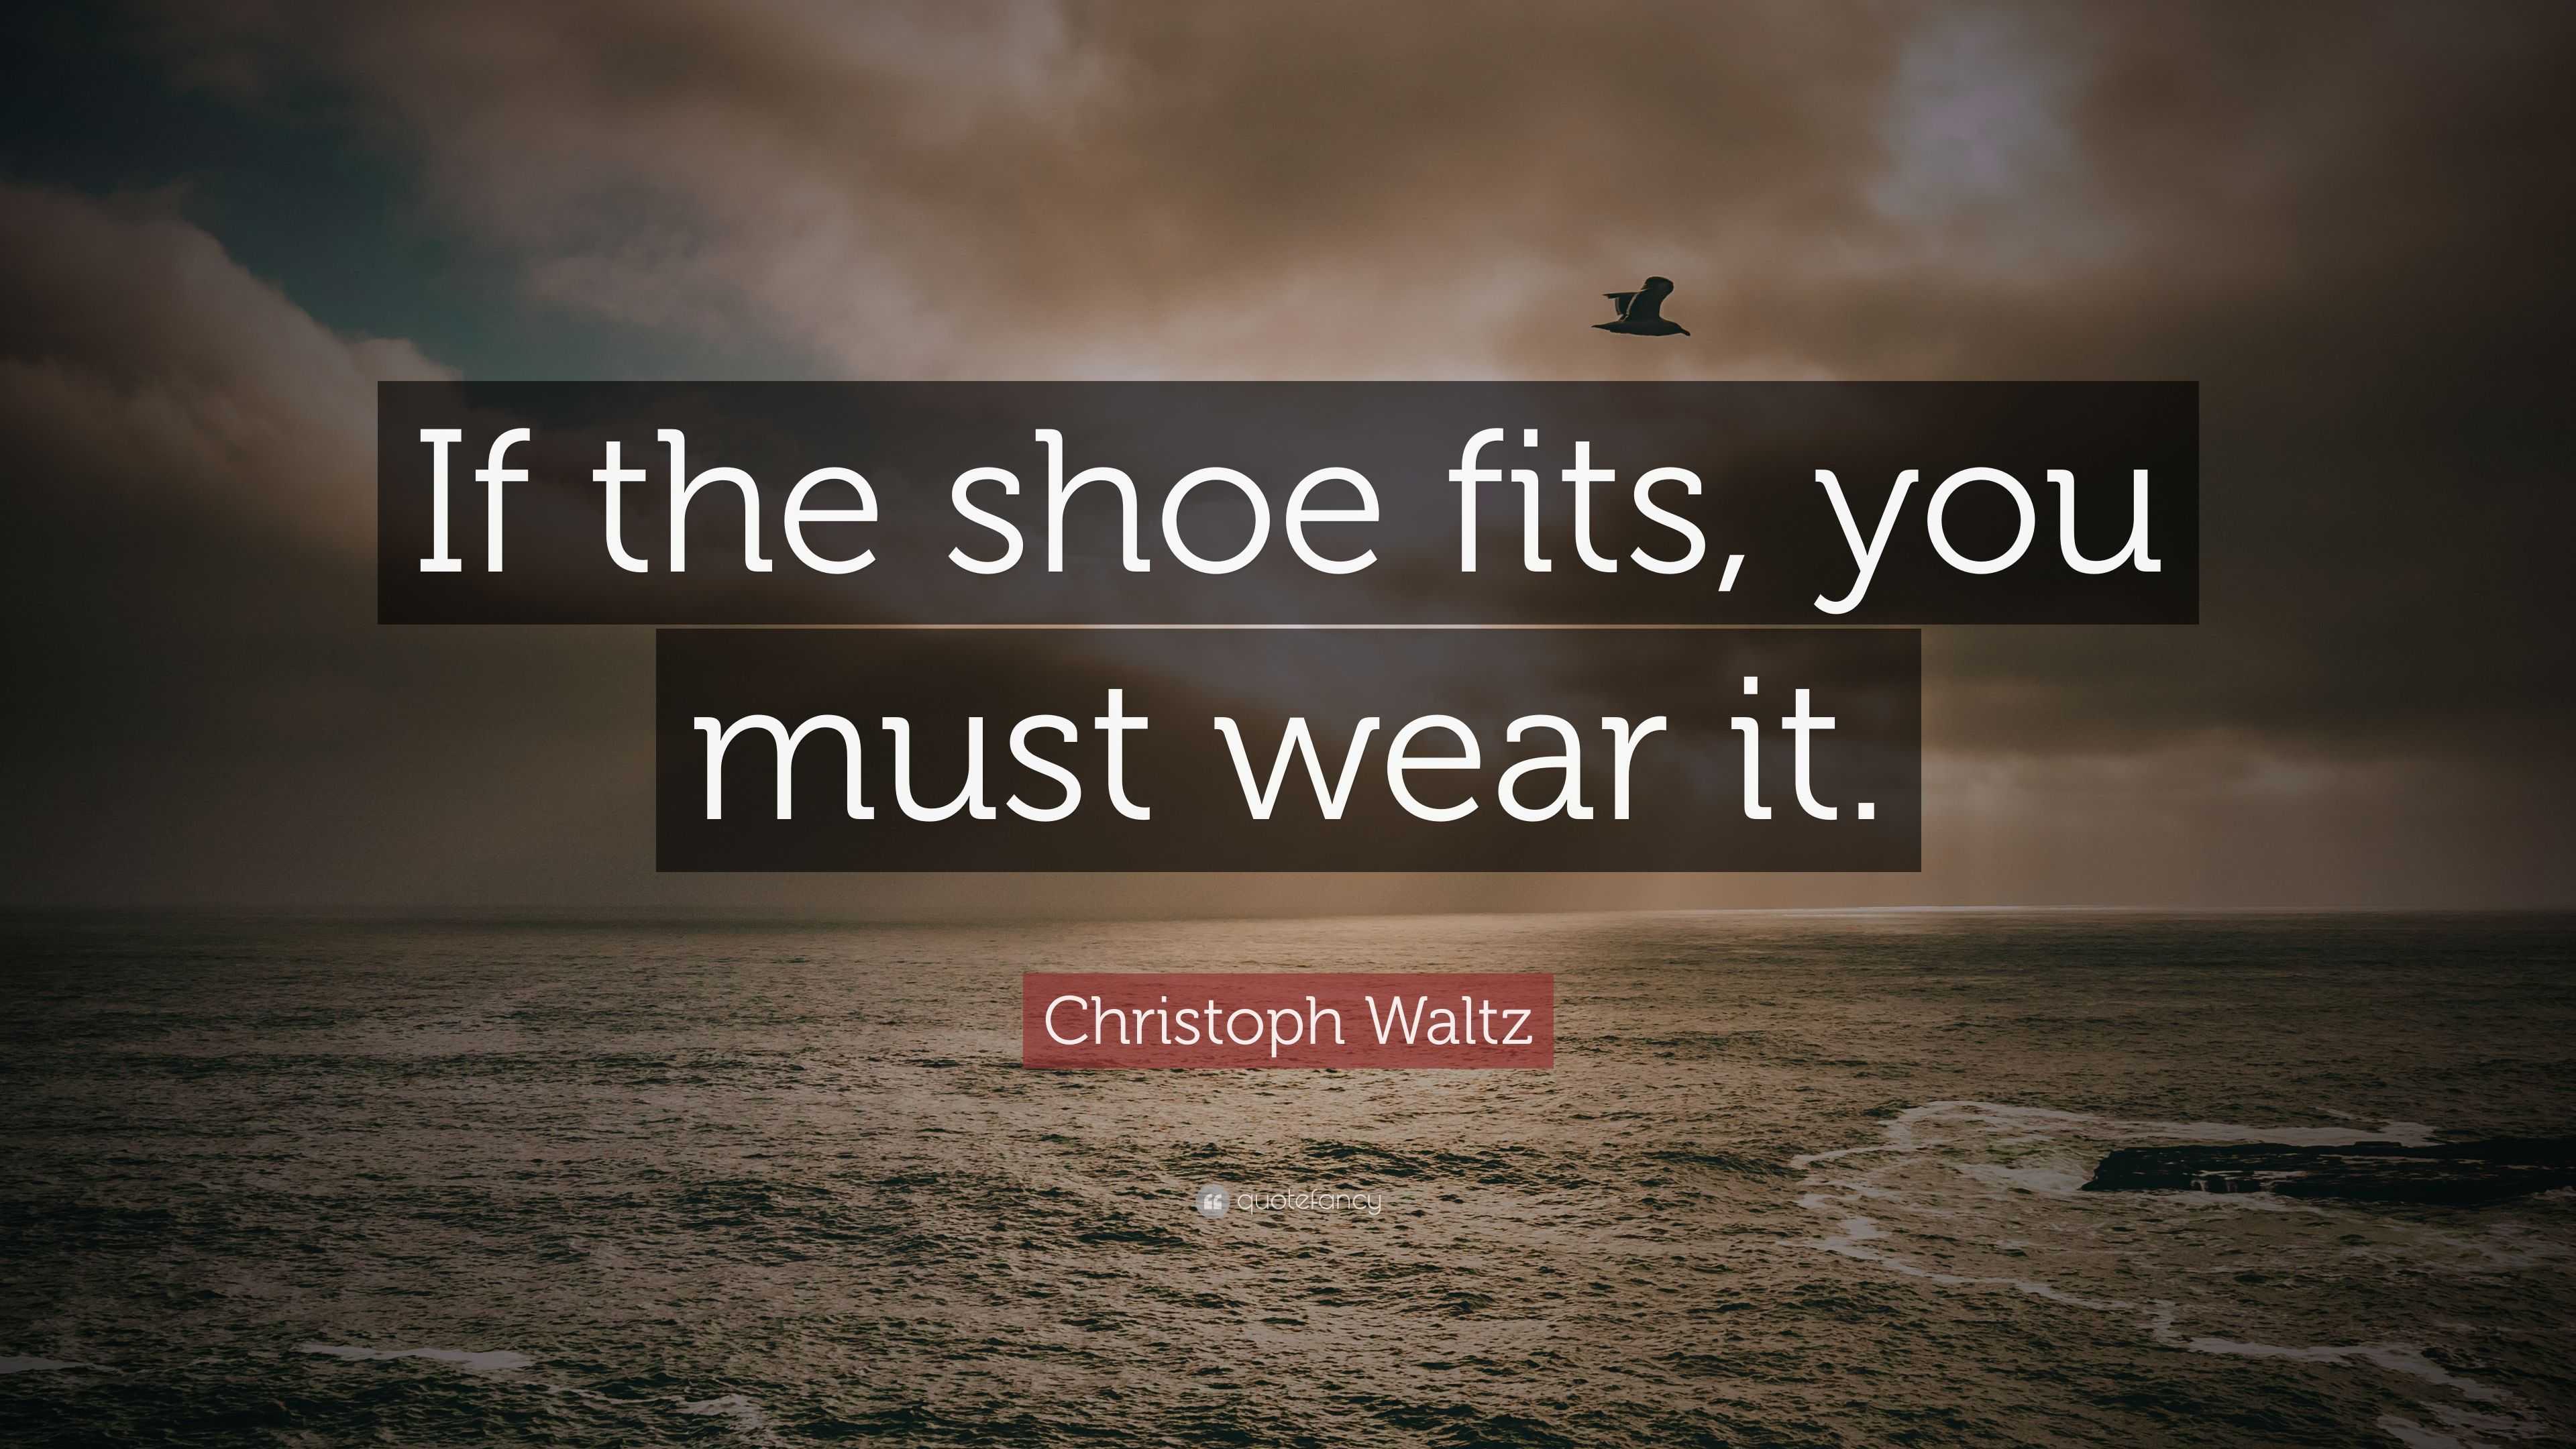 Christoph Waltz Quote “if The Shoe Fits You Must Wear It”